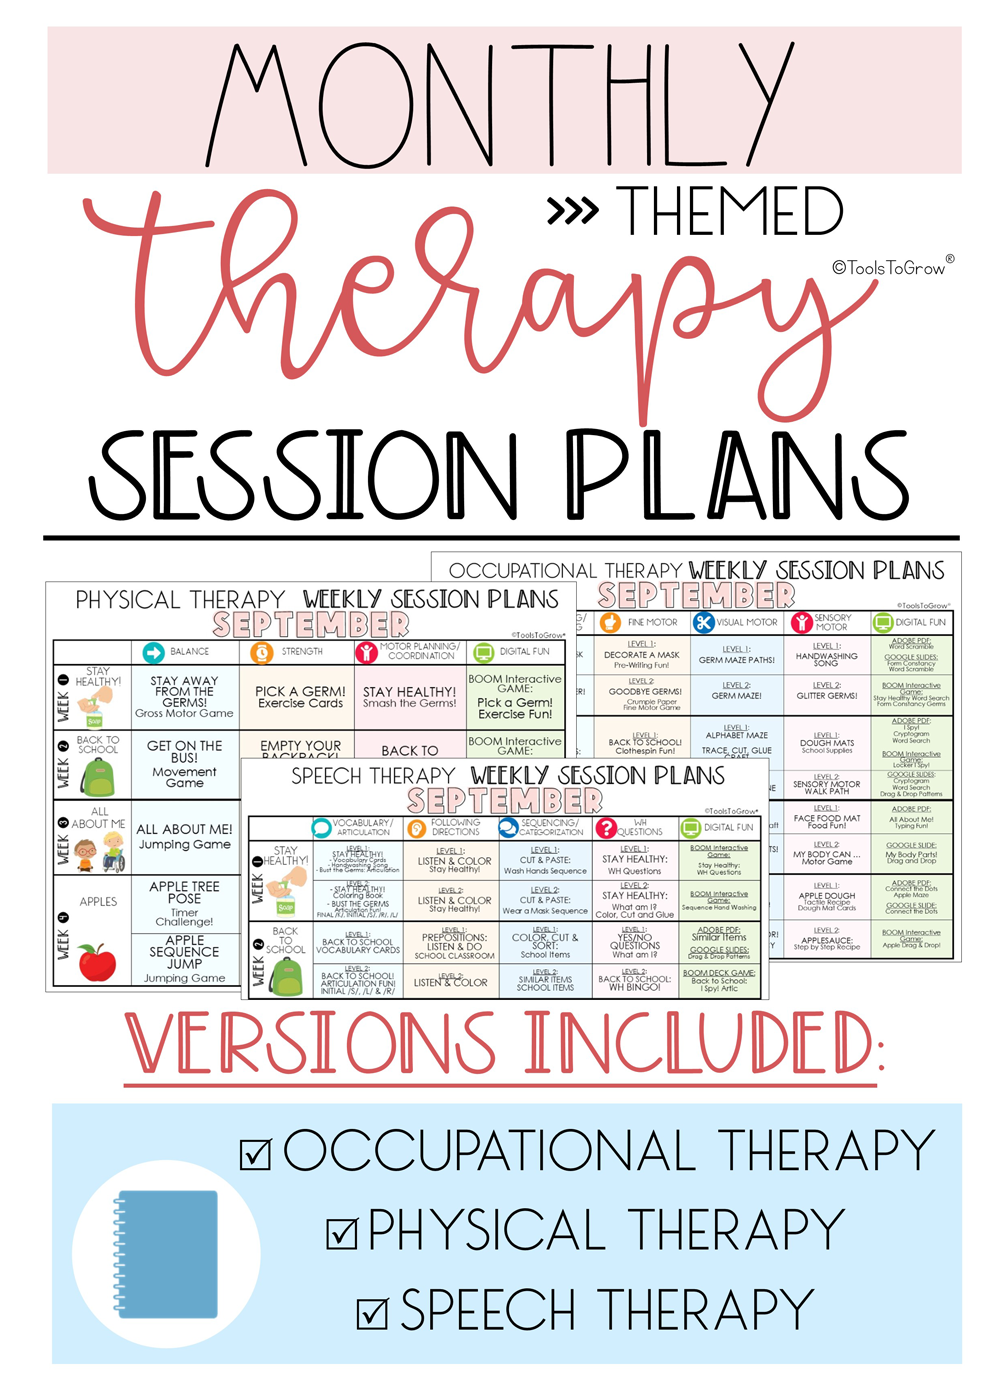 monthly-themed-therapy-session-plans-blog-tools-to-grow-inc